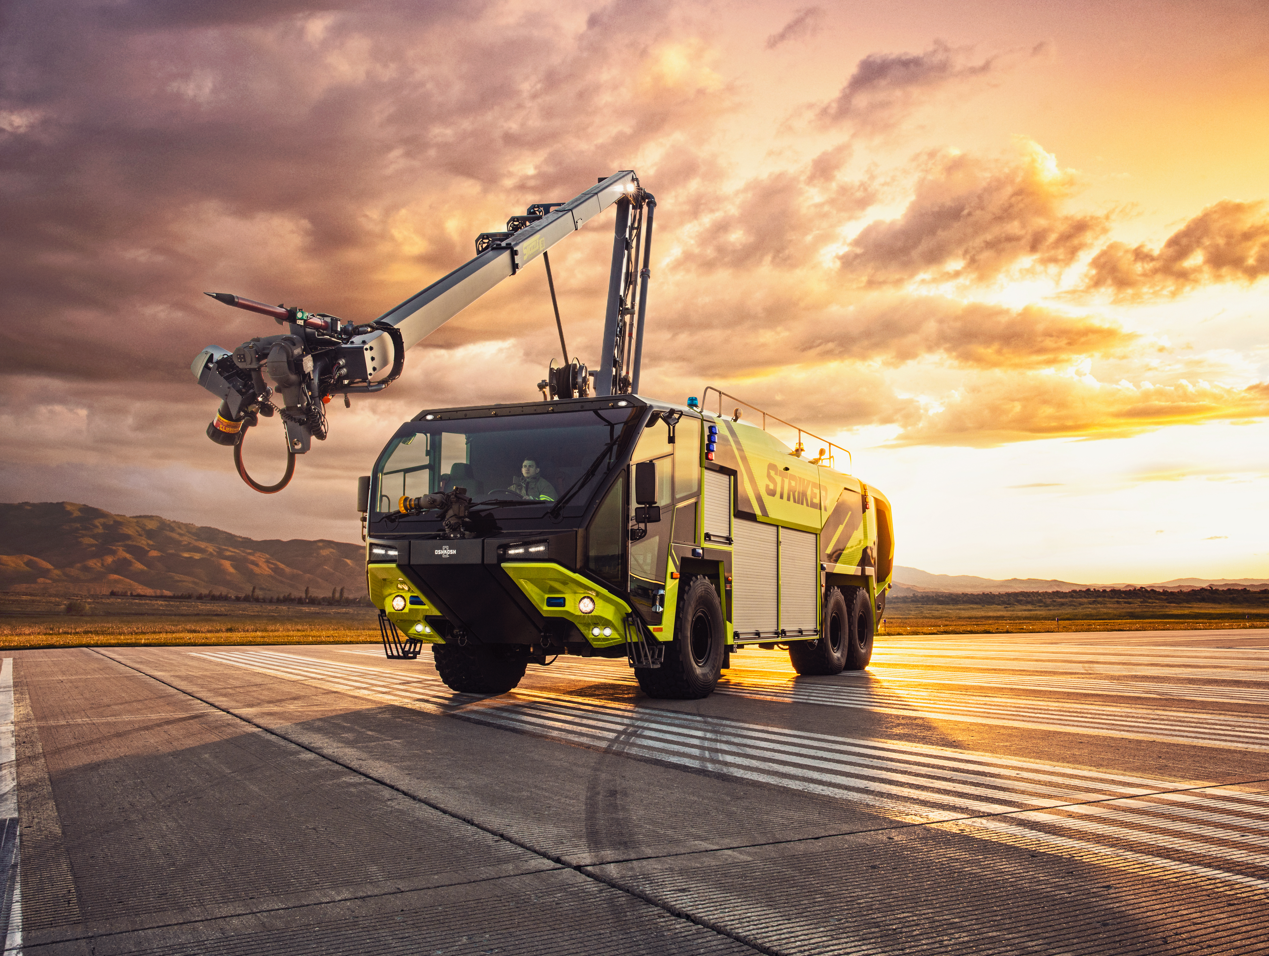 Oshkosh Striker parked with Snozzle high-reach extendable turret extended forward